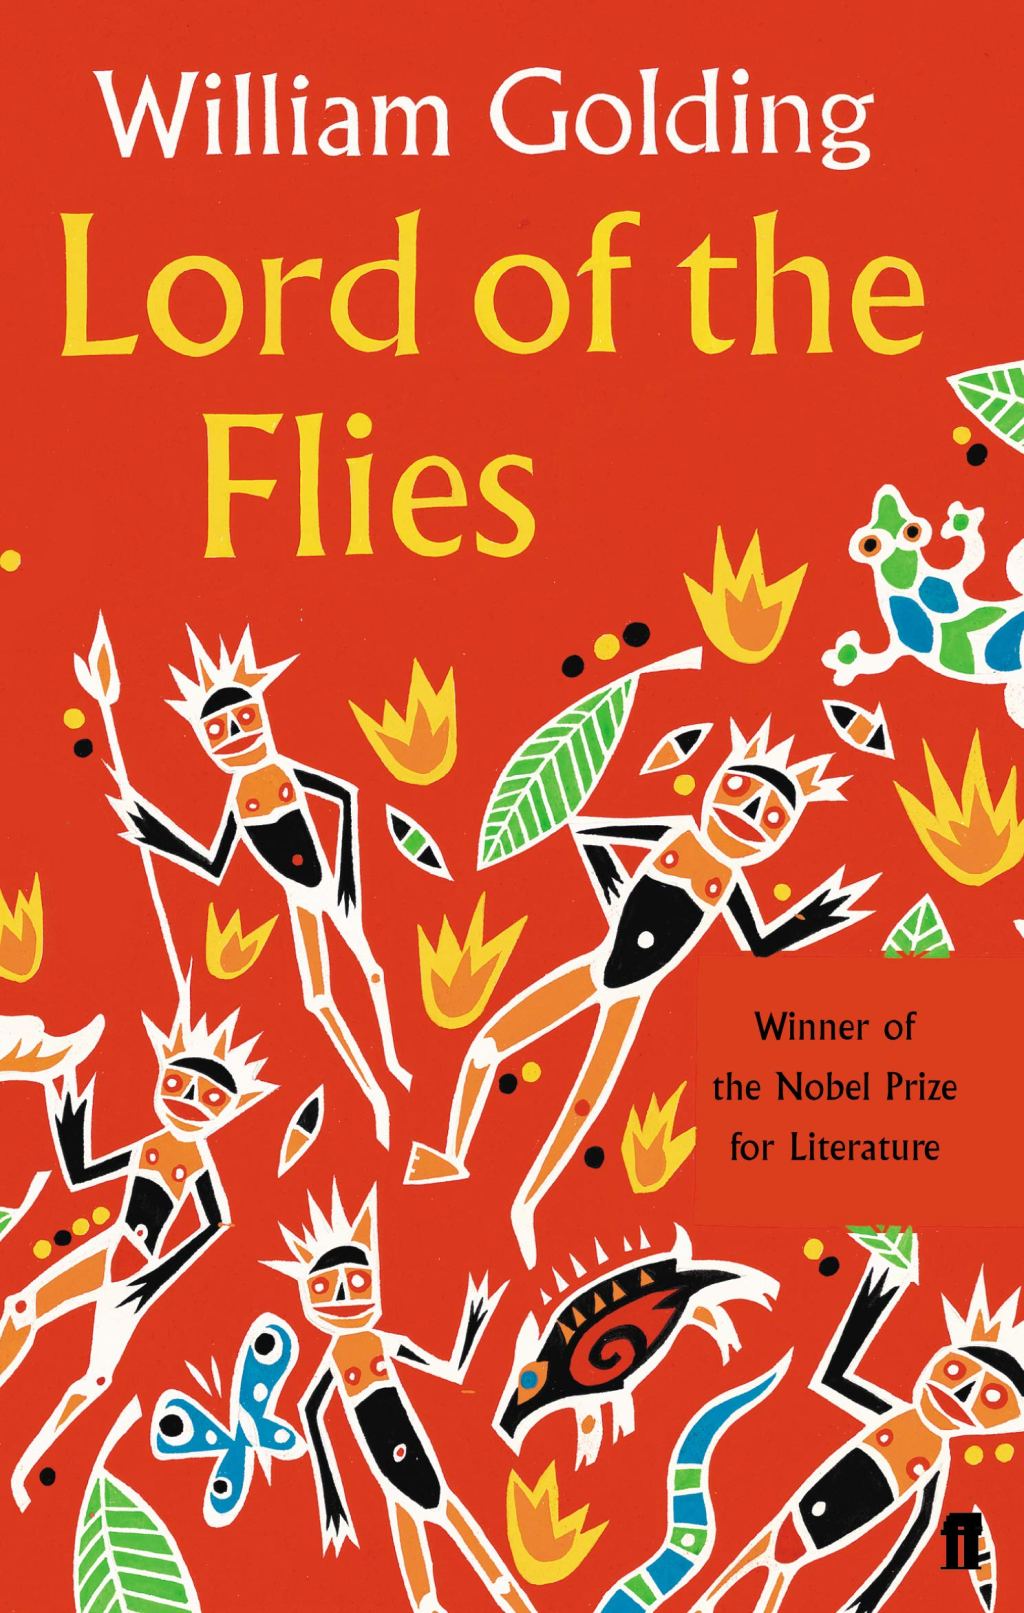 Dystopia in Lord of the Flies by William Golding